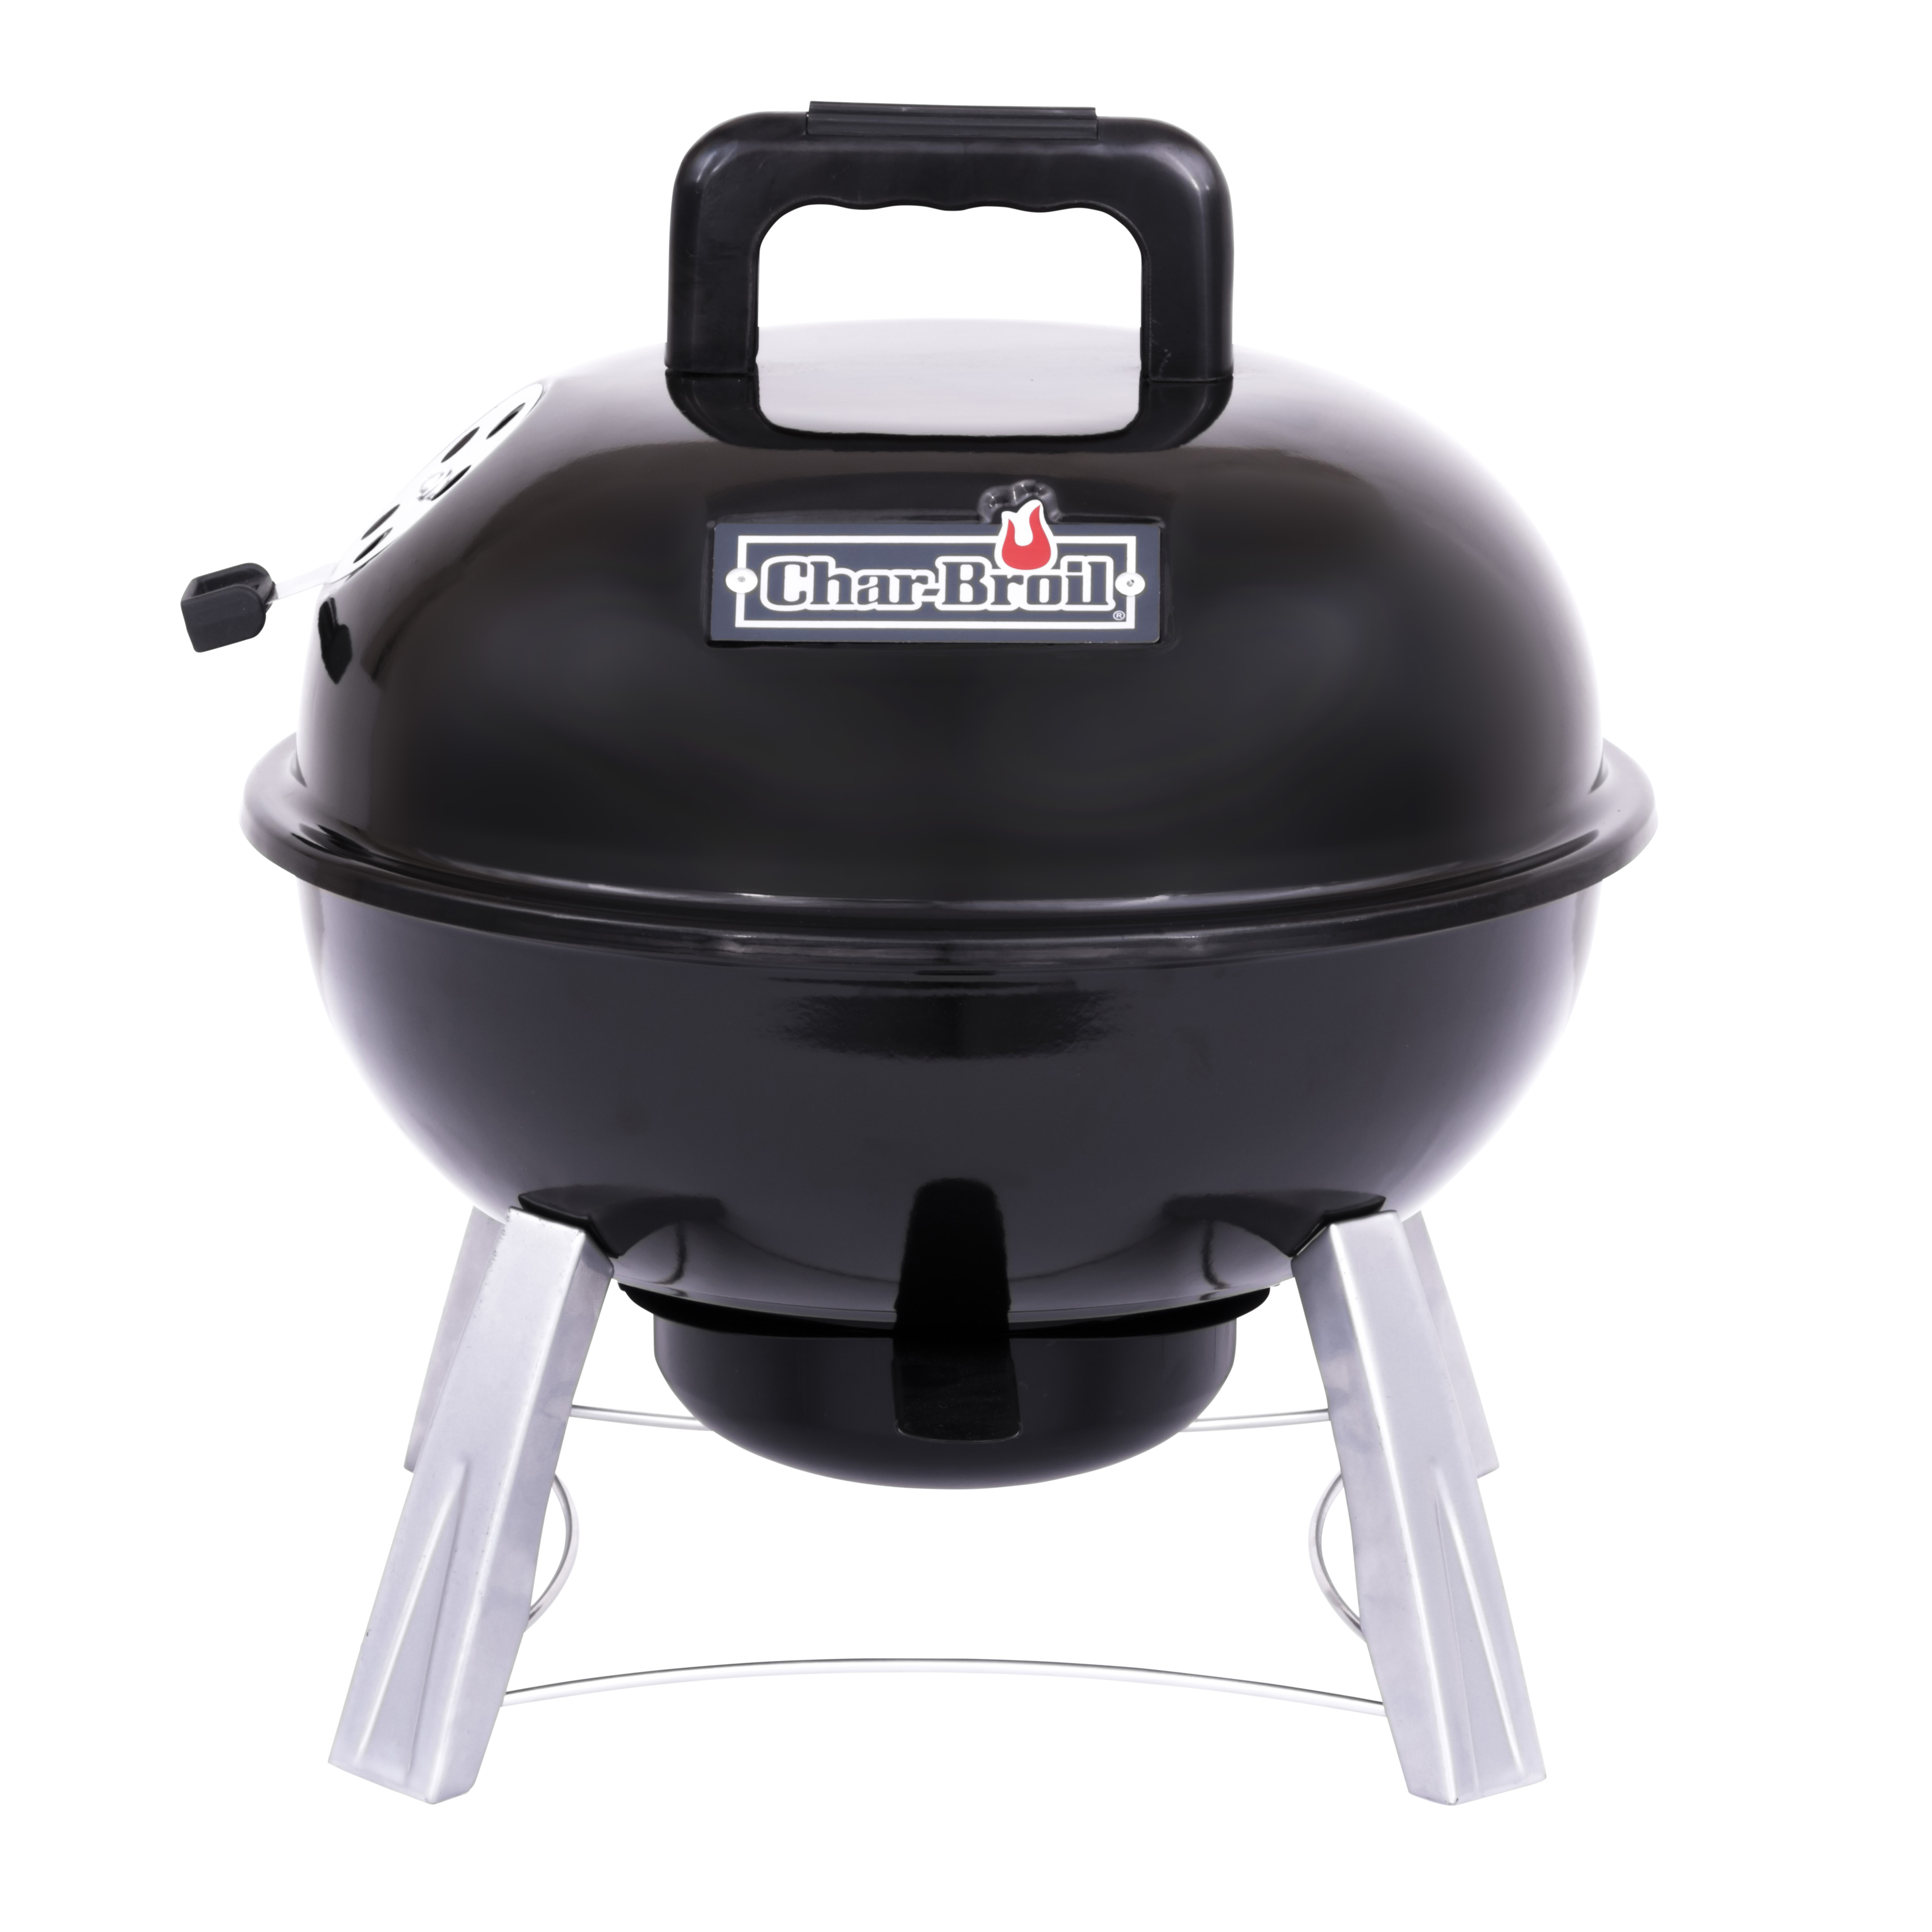 Char-Broil 150 Portable Tabletop Kettle Charcoal Grill - image 1 of 8